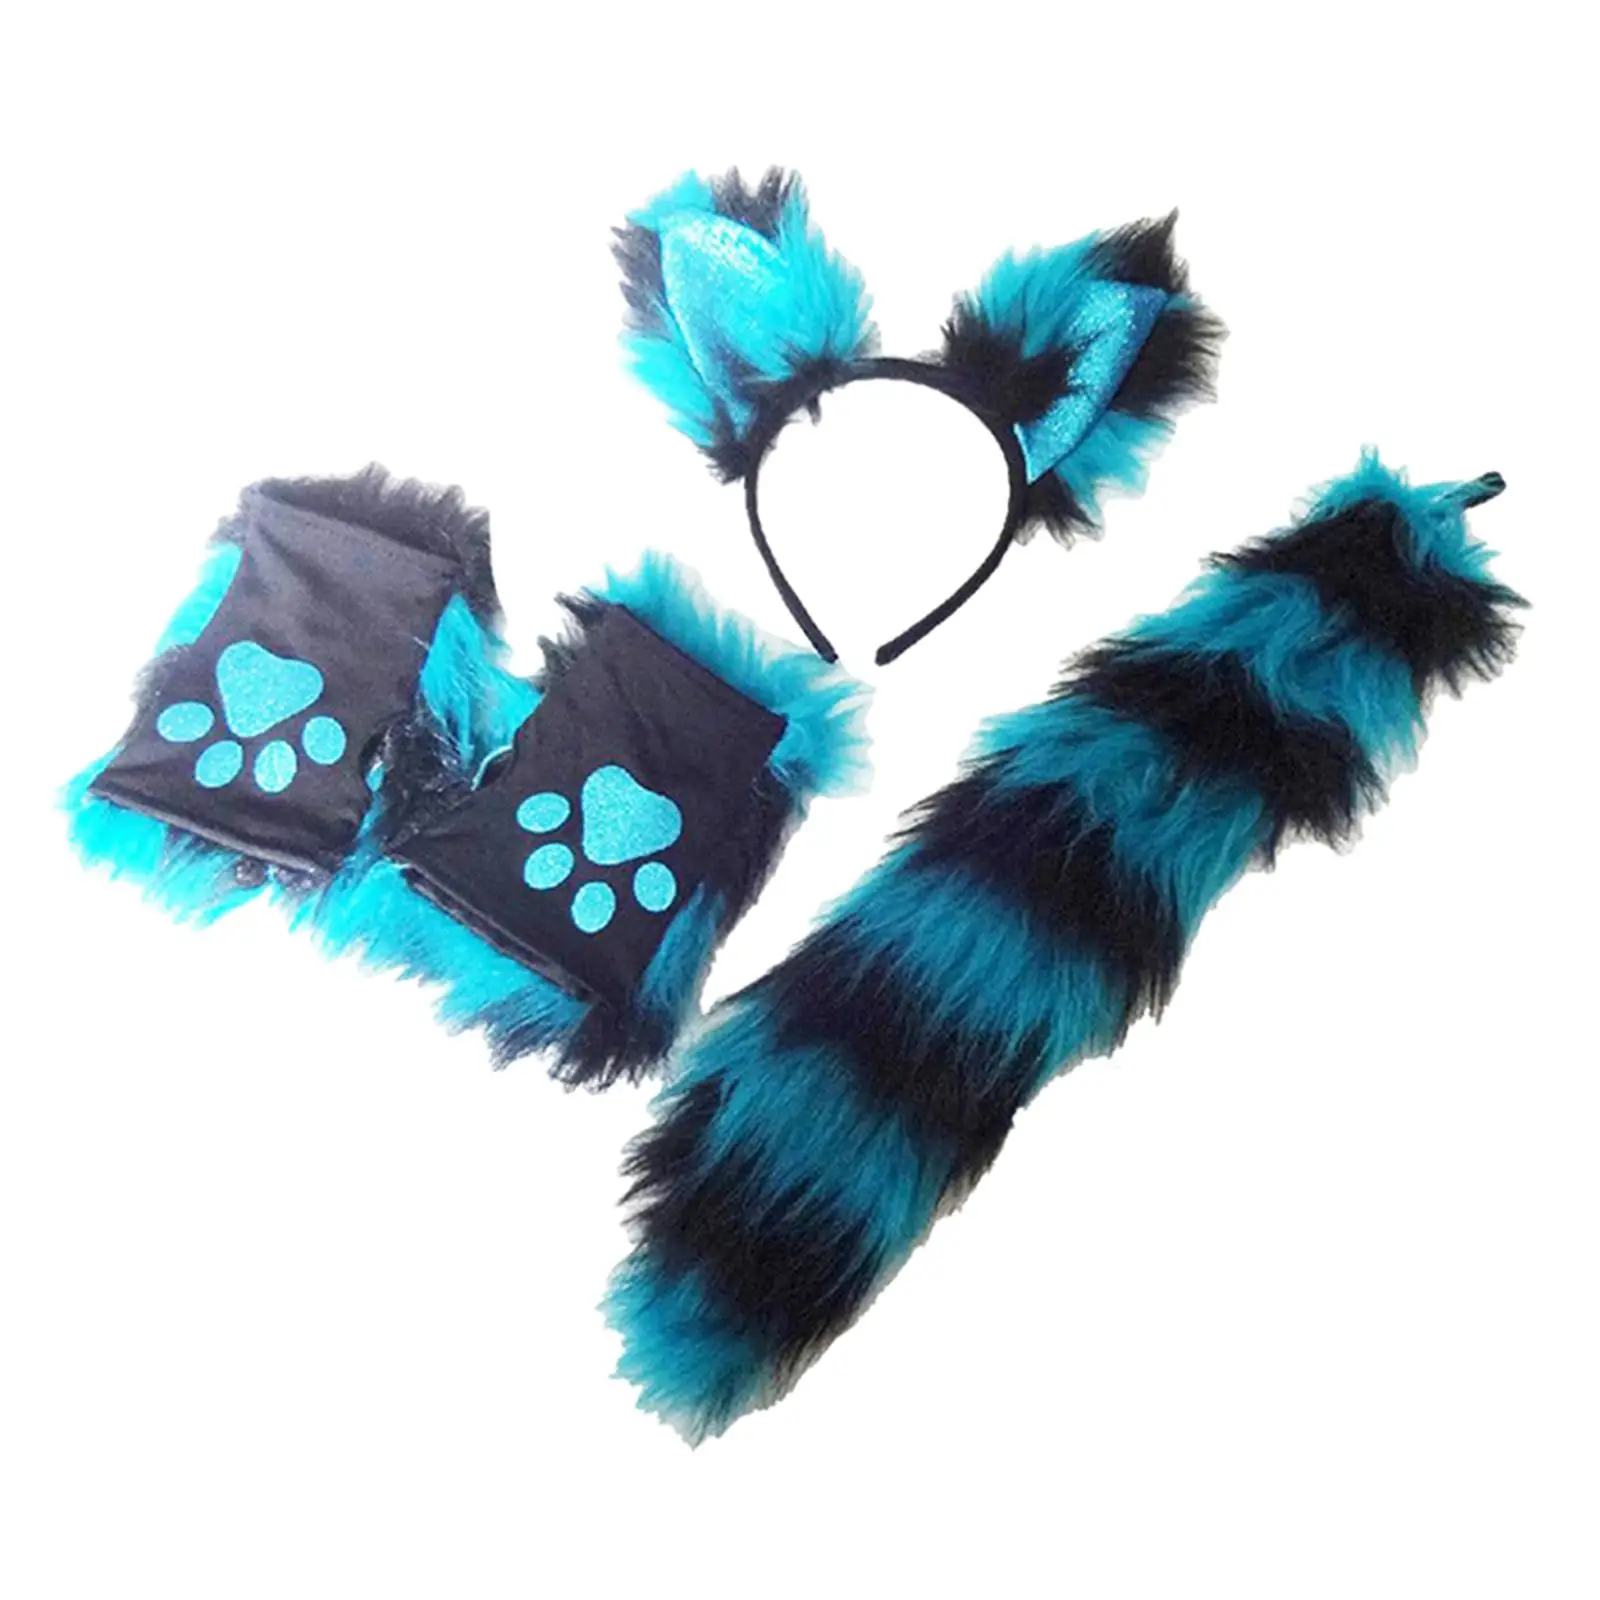 Plush Fox Ears Hair Hoop Costume Cosplay Gloves Tail Set Dress Adult for Kids Adult Halloween Masquerade Role Play Party